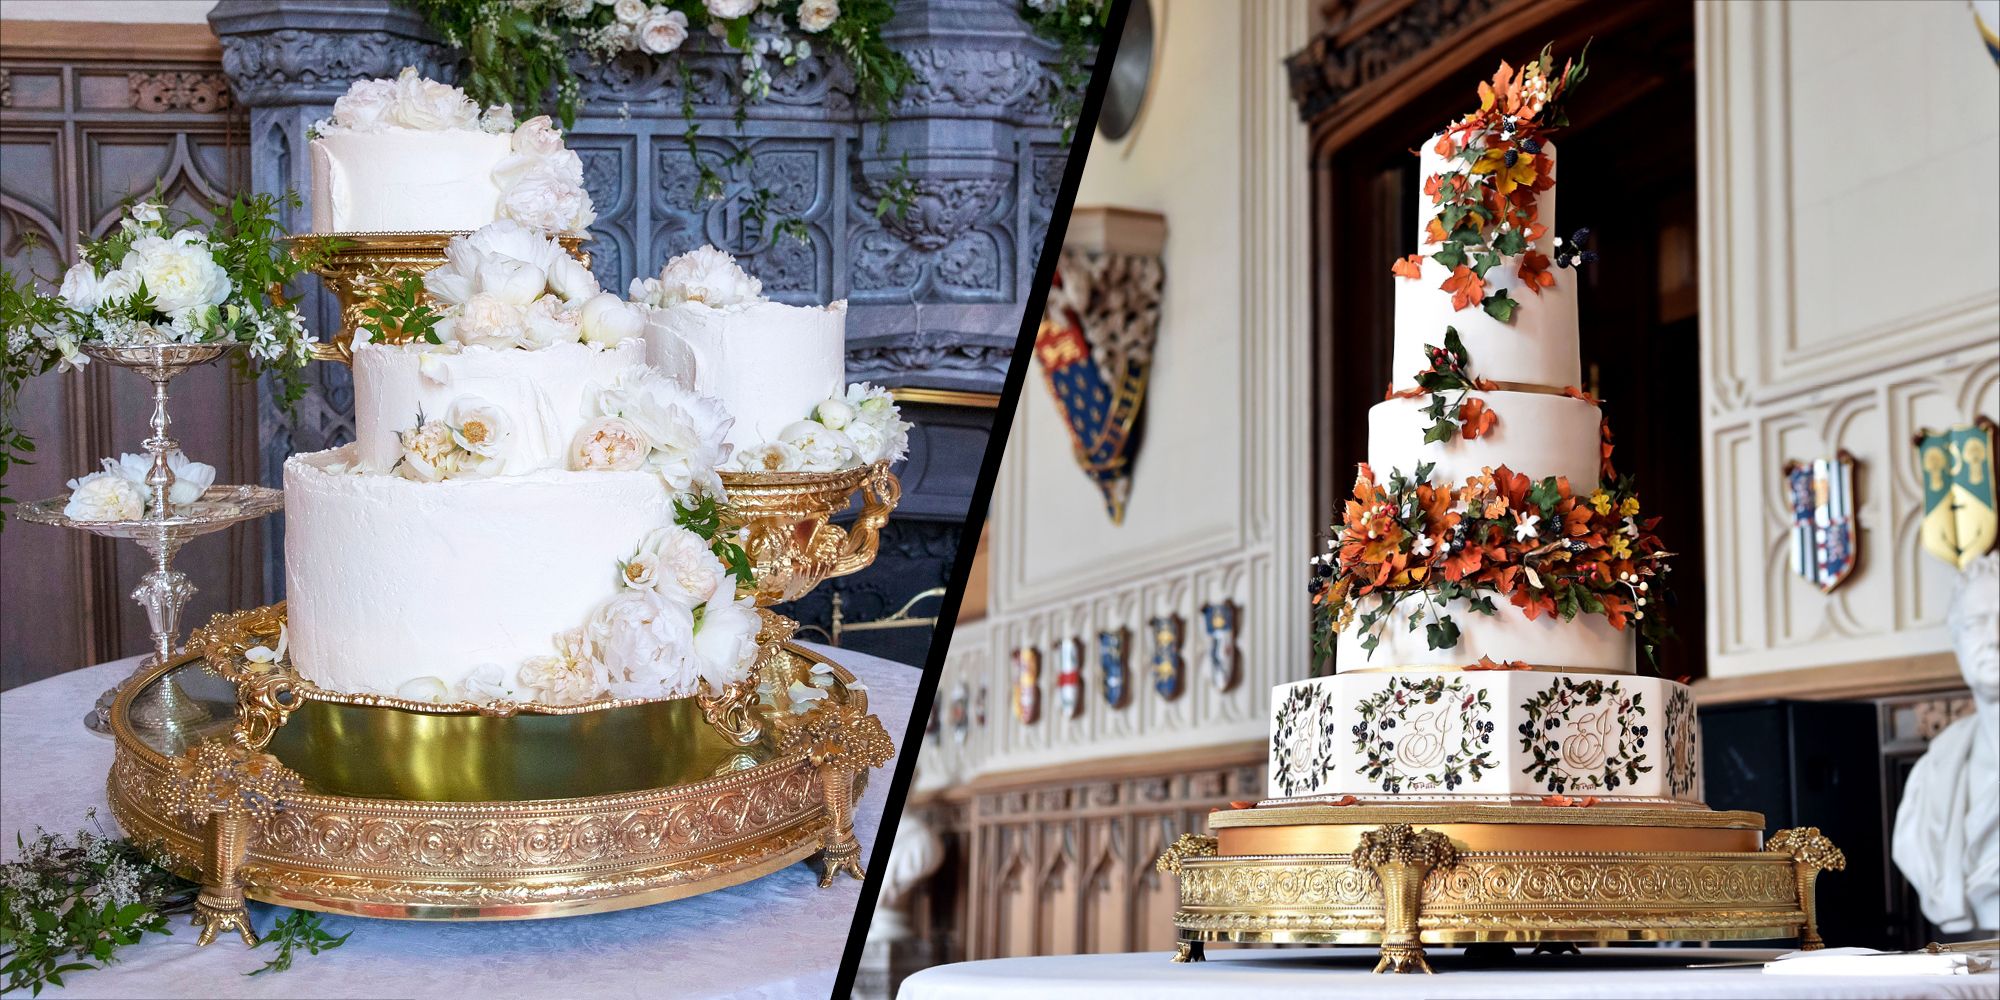 Lilibet's Birthday Cake Was a Sweet Tribute to Prince Harry and Meghan  Markle's Wedding